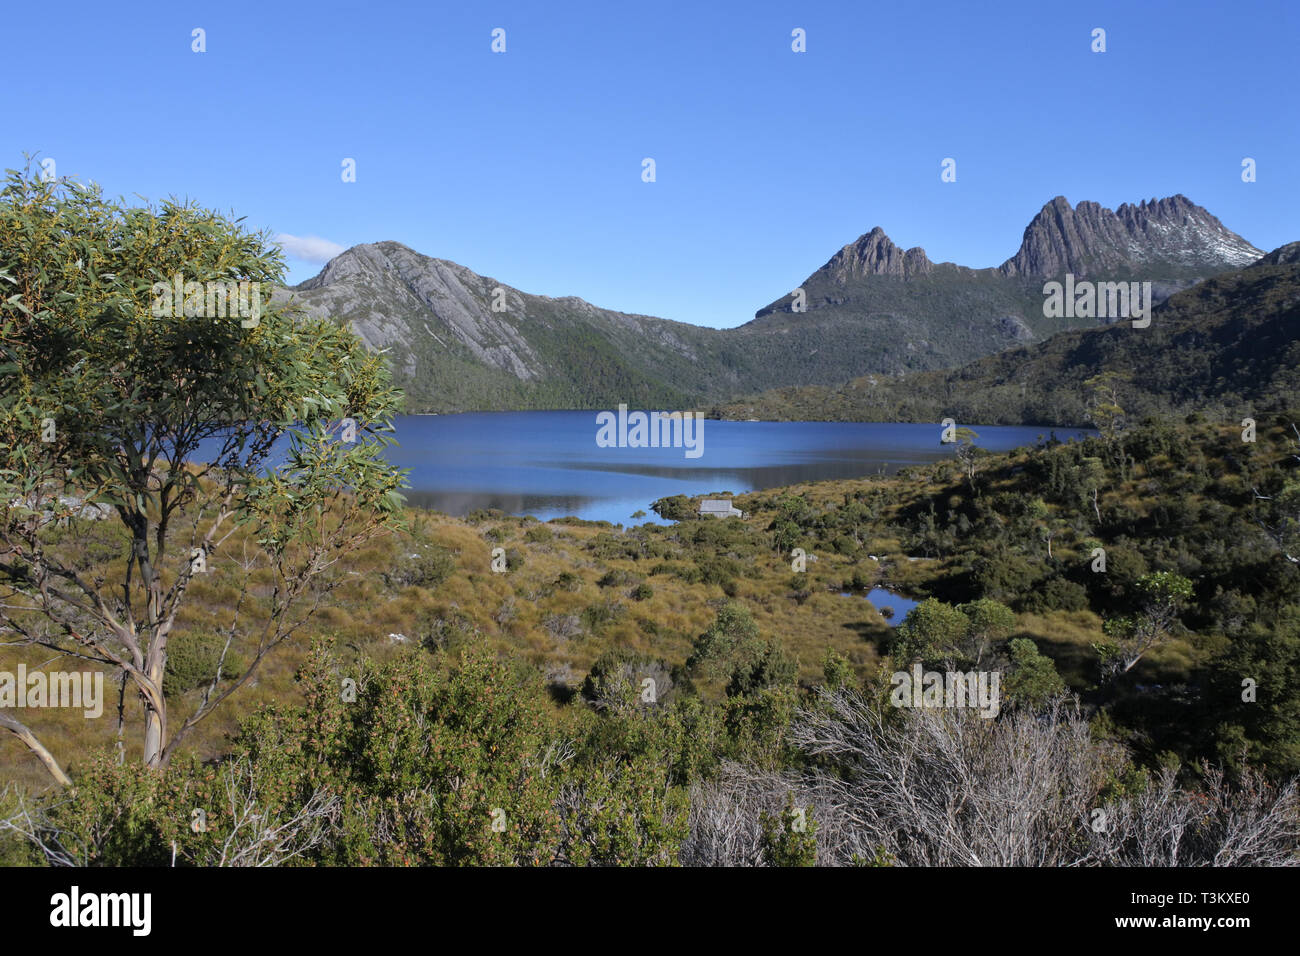 Landscape view of Cradle Mountain-Lake St Clair National Park ...